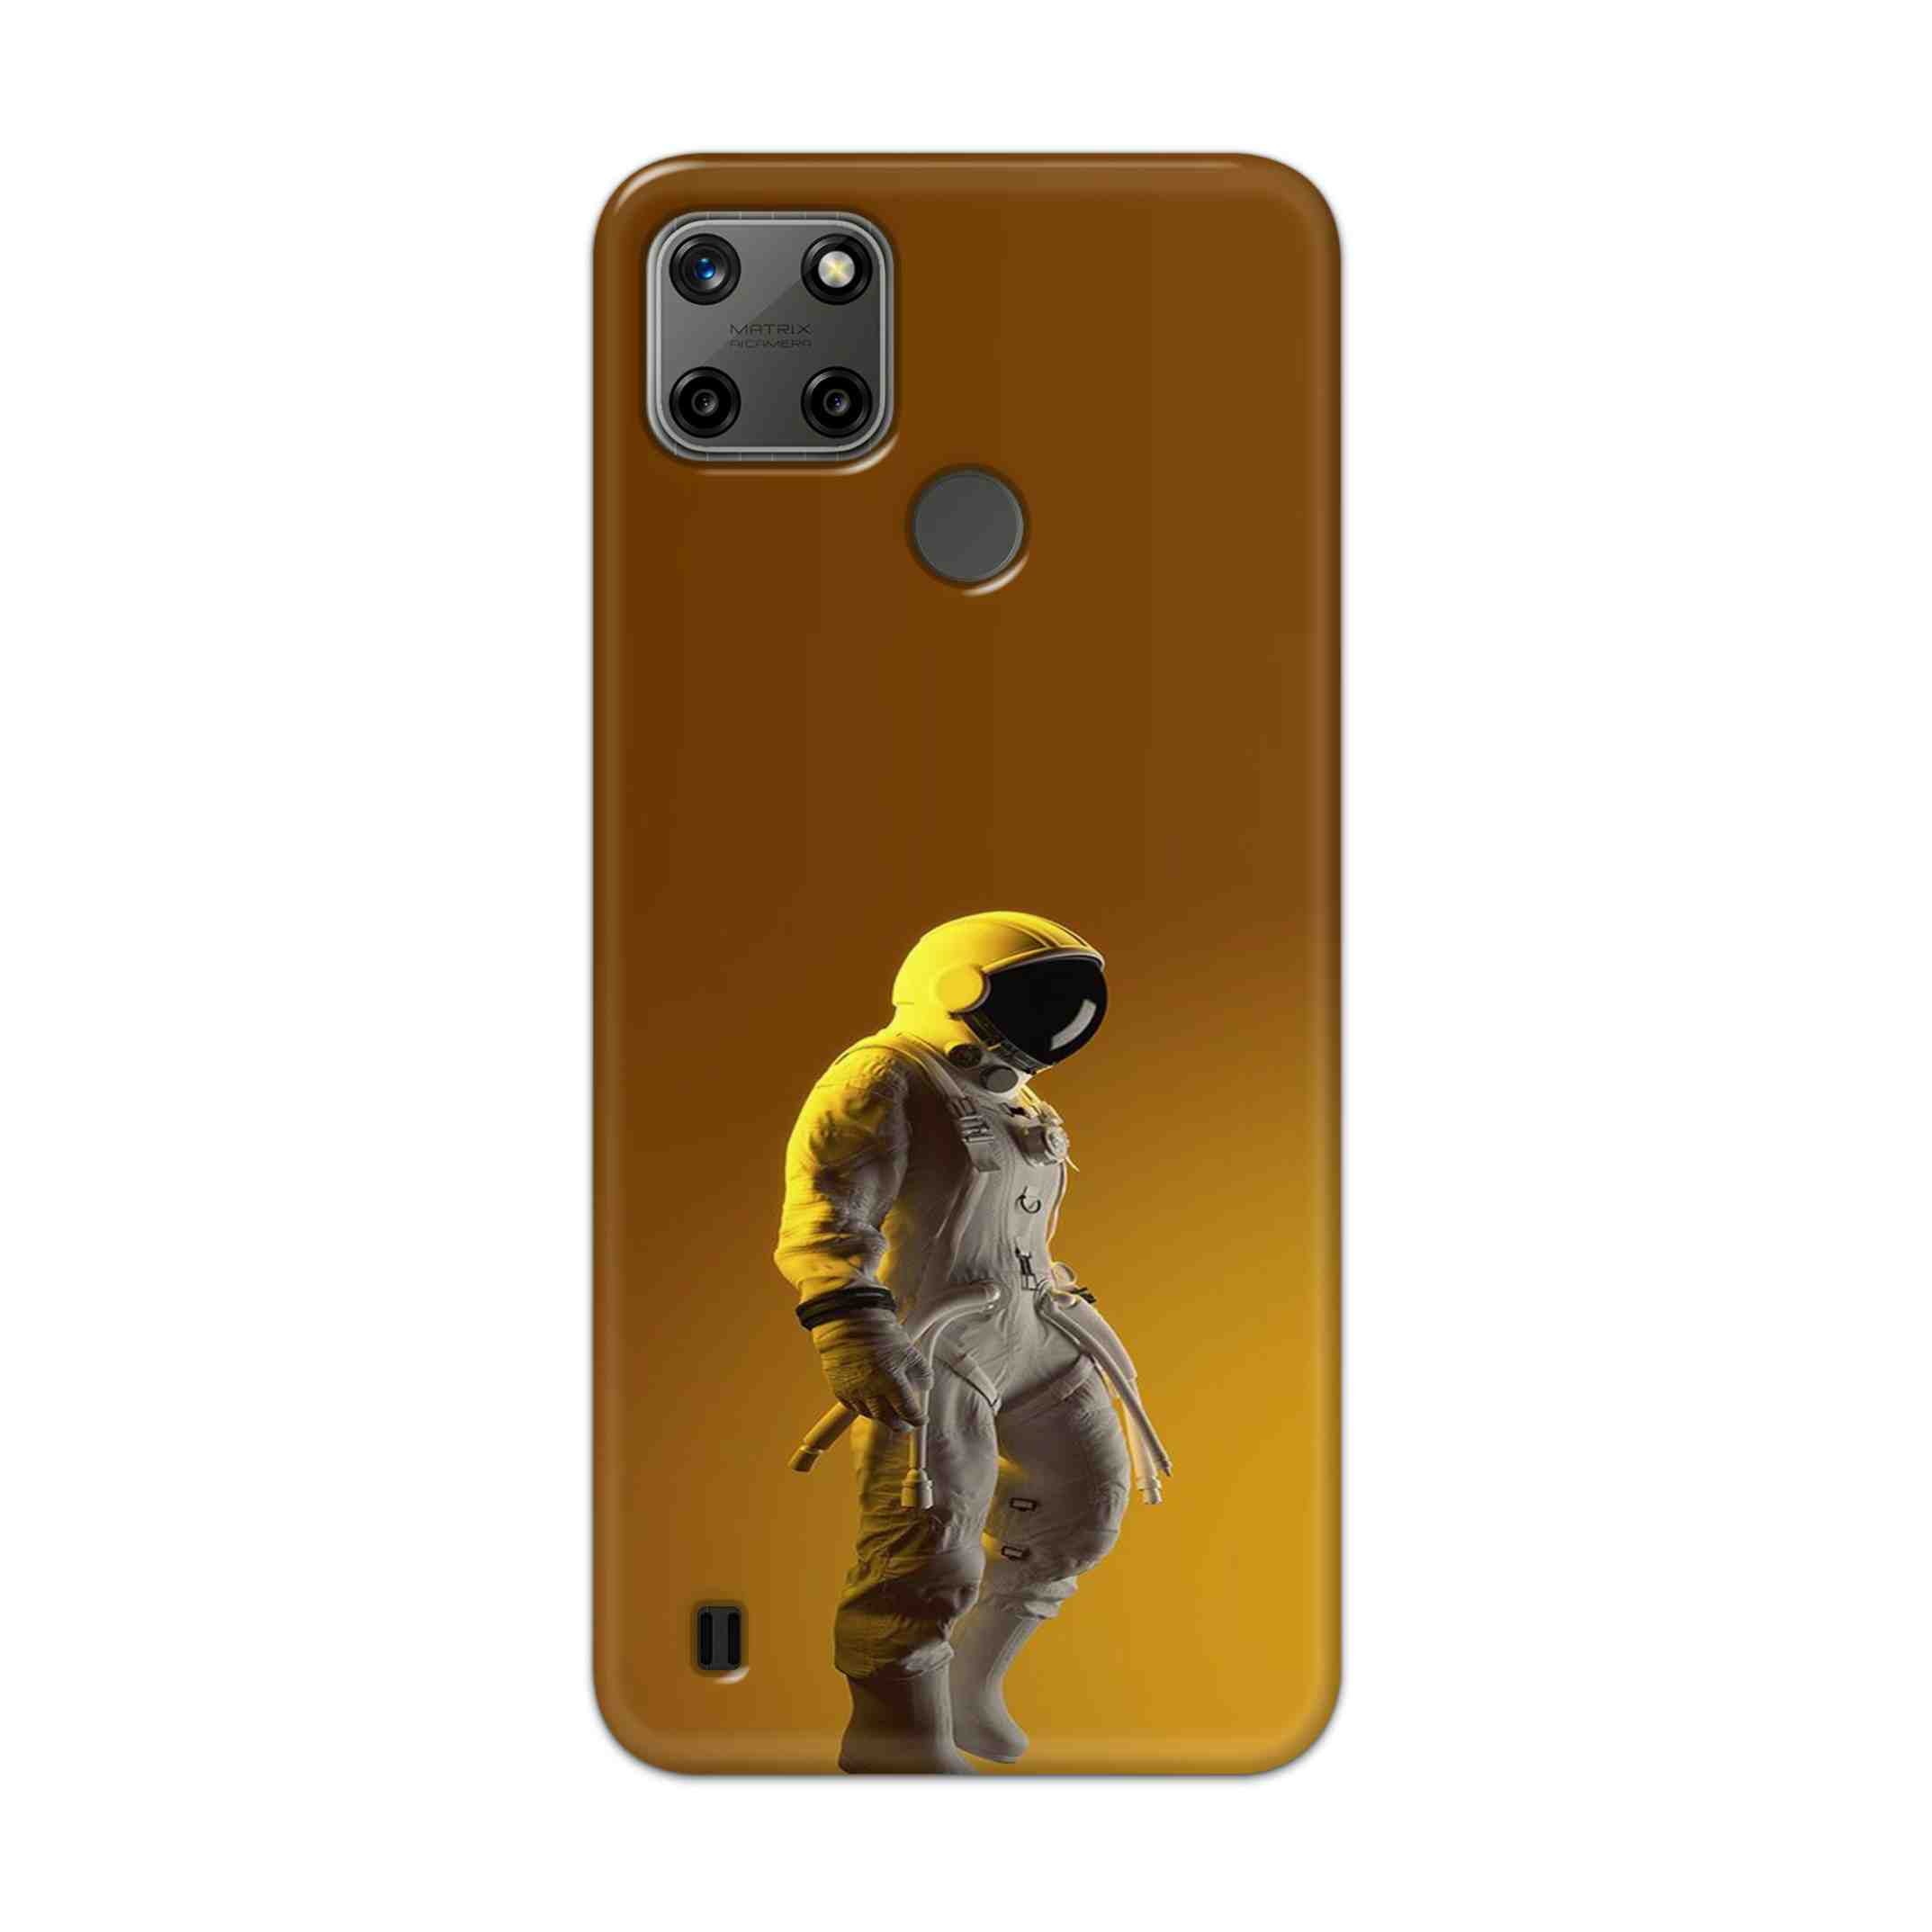 Buy Yellow Astronaut Hard Back Mobile Phone Case Cover For Realme C25Y Online